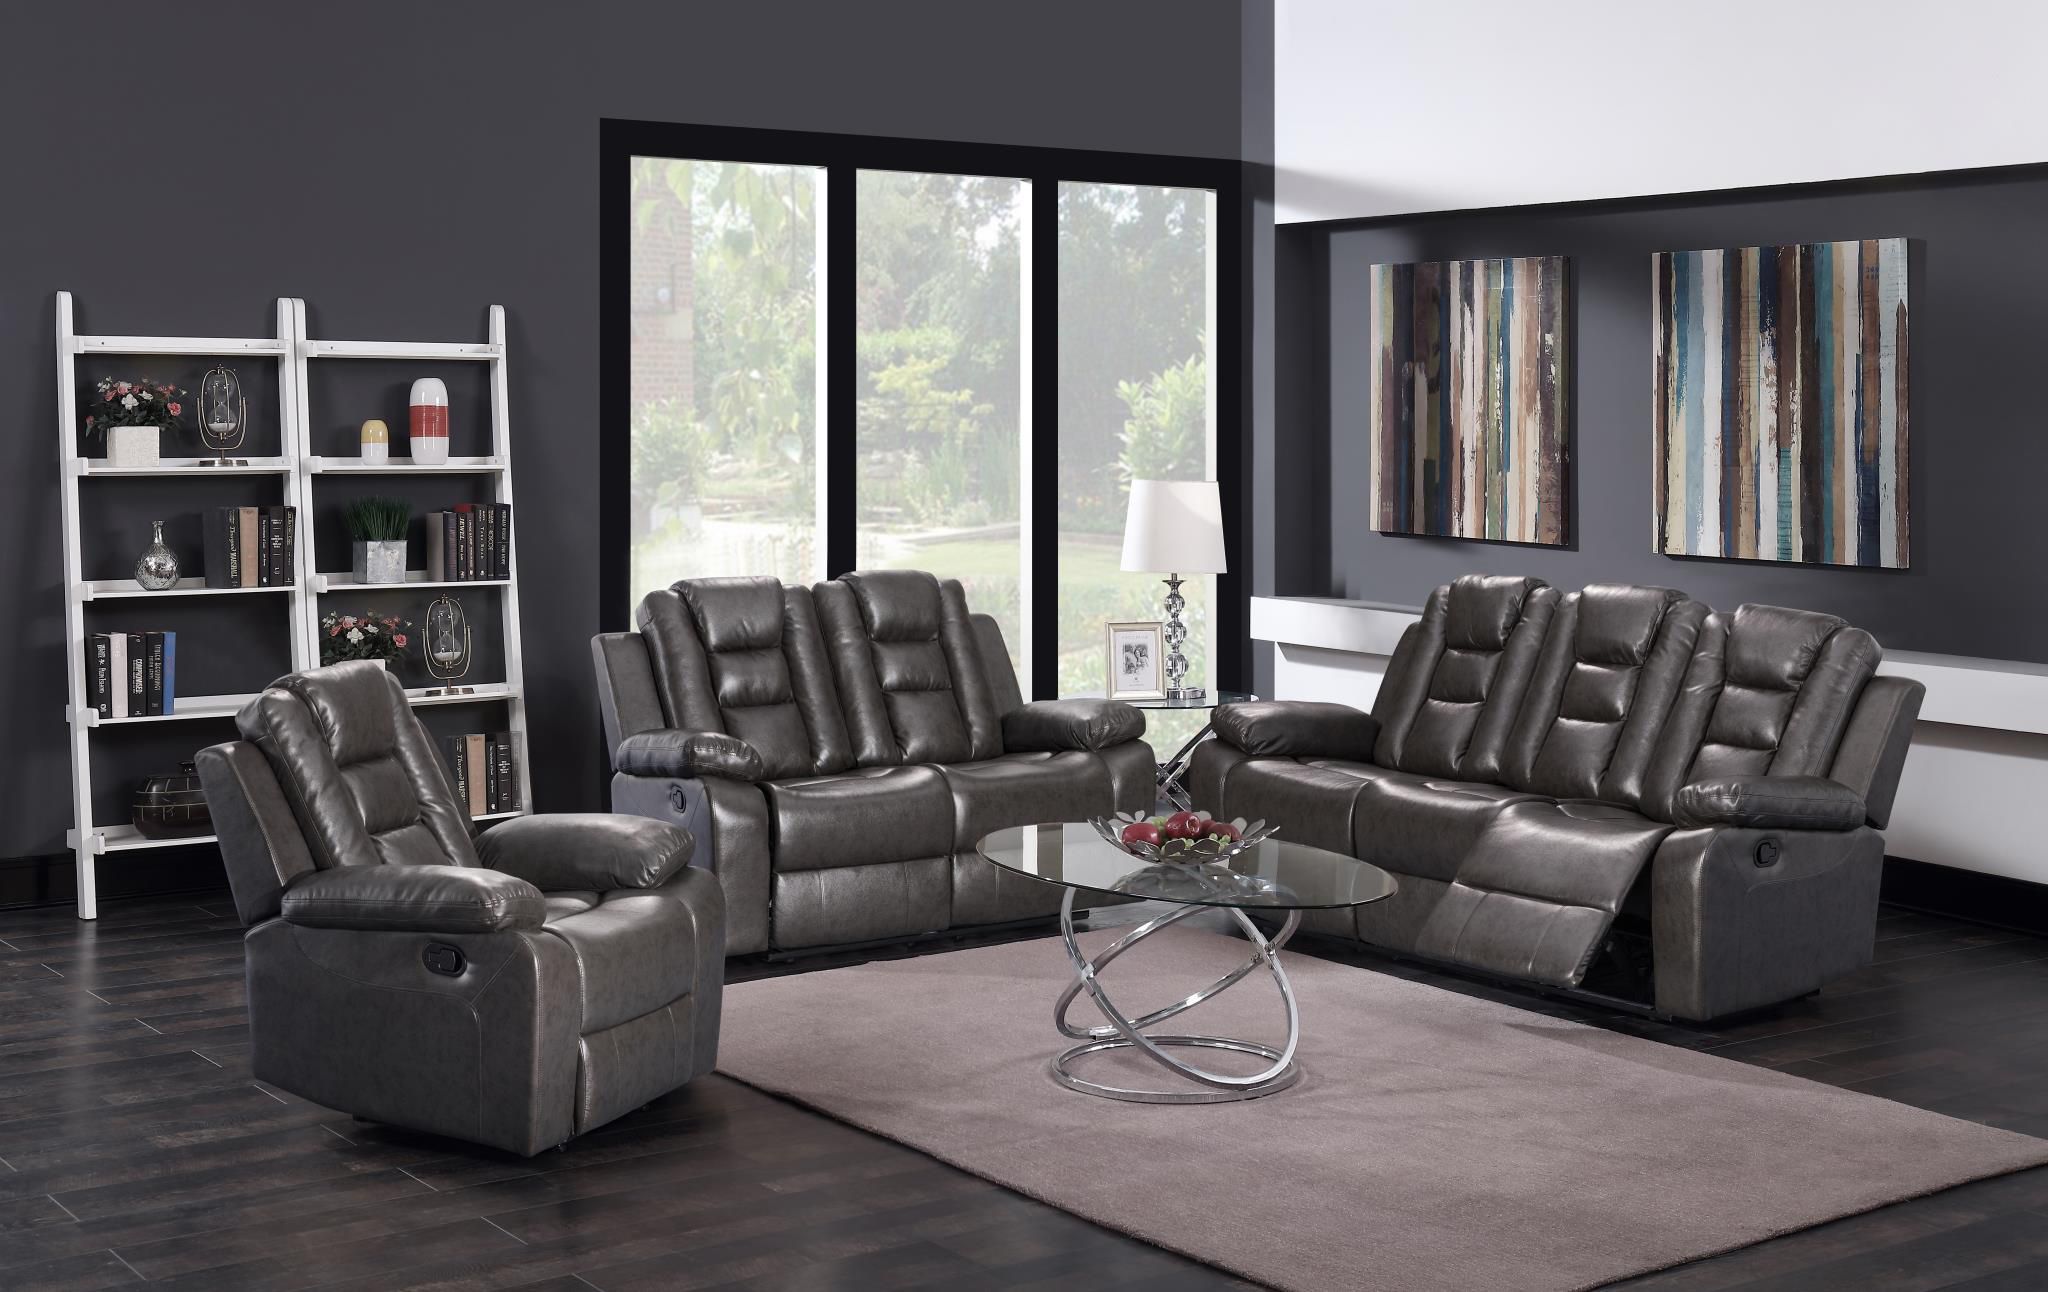 🔥Just Arrived 💥SOFA & LOVESEAT 🛋️  - Grey Color- All Come In Box 📦 - 2 PC - Available Delivery 🚚 